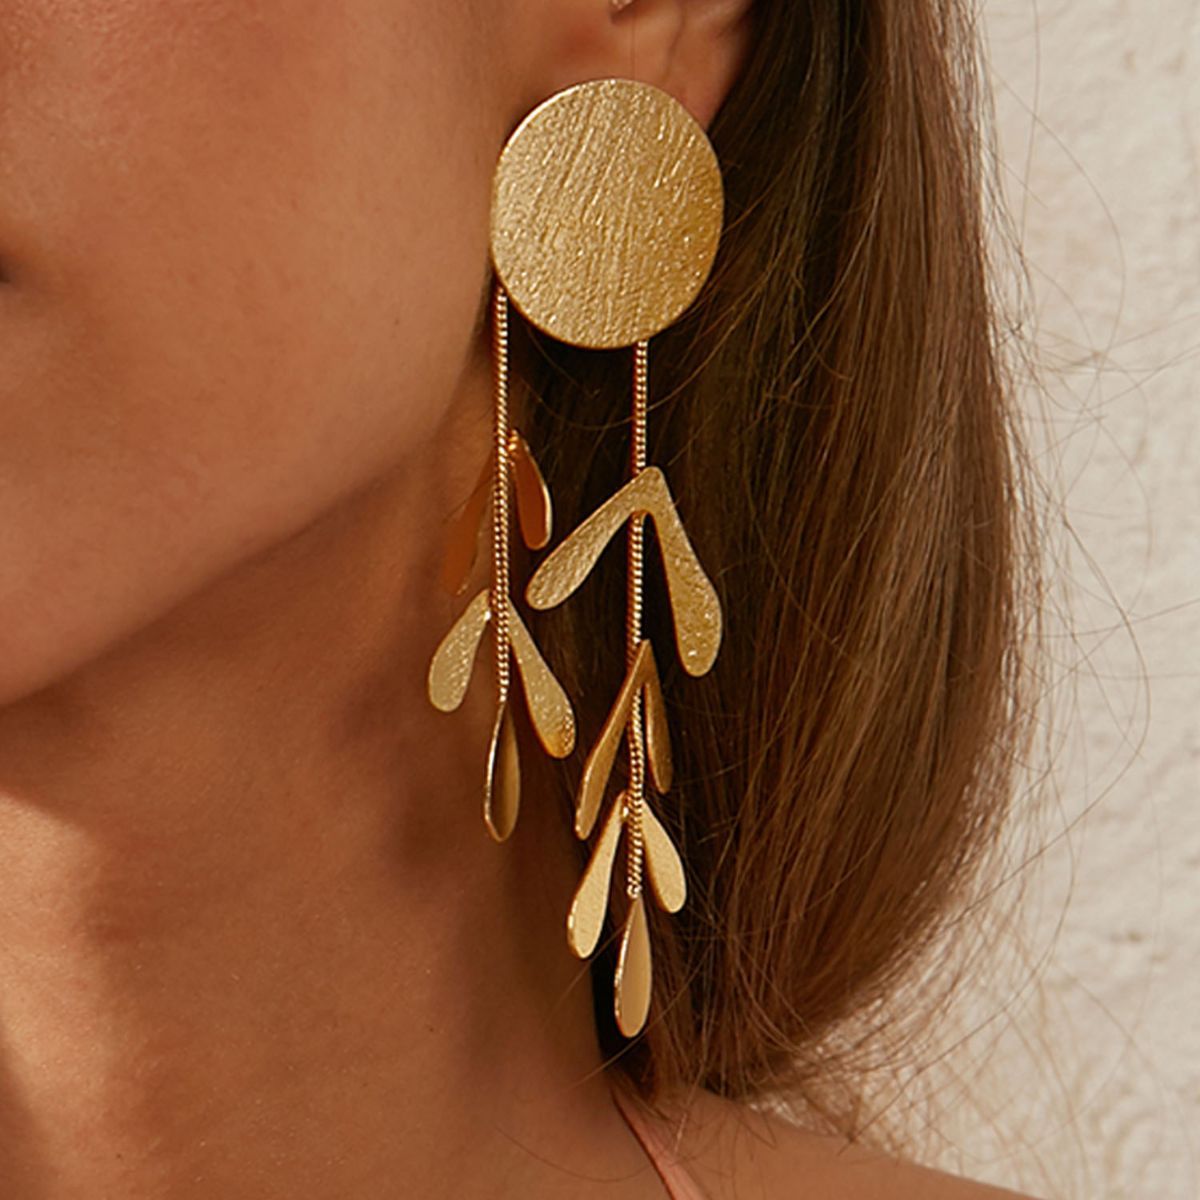 Pipa Bella Oblong Shaped Gold-Plated Earrings